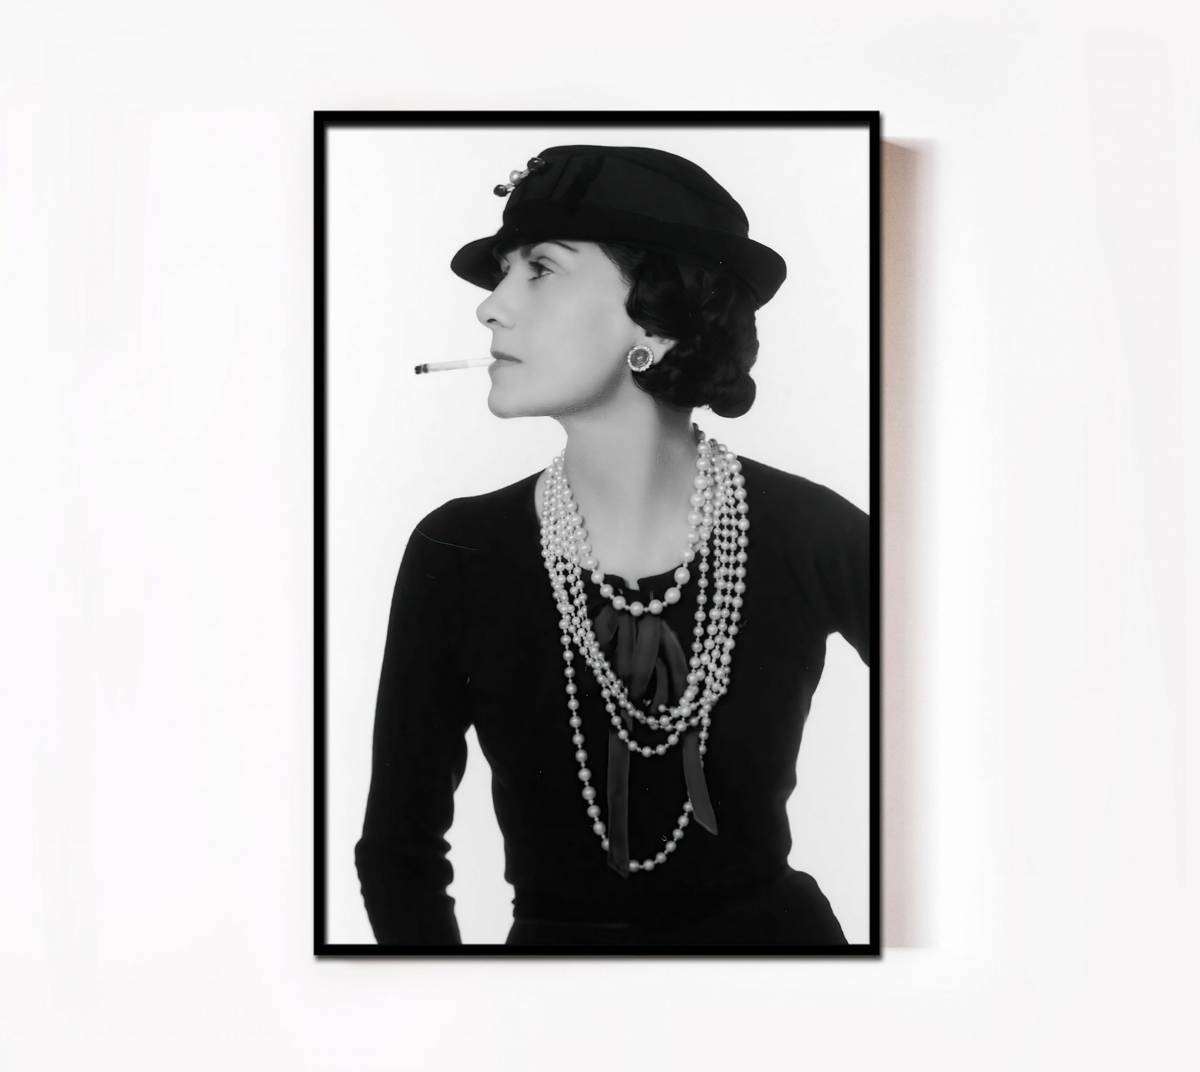 Coco Chanel Historical Photography - Coco Chanel Prints - High Quality ...